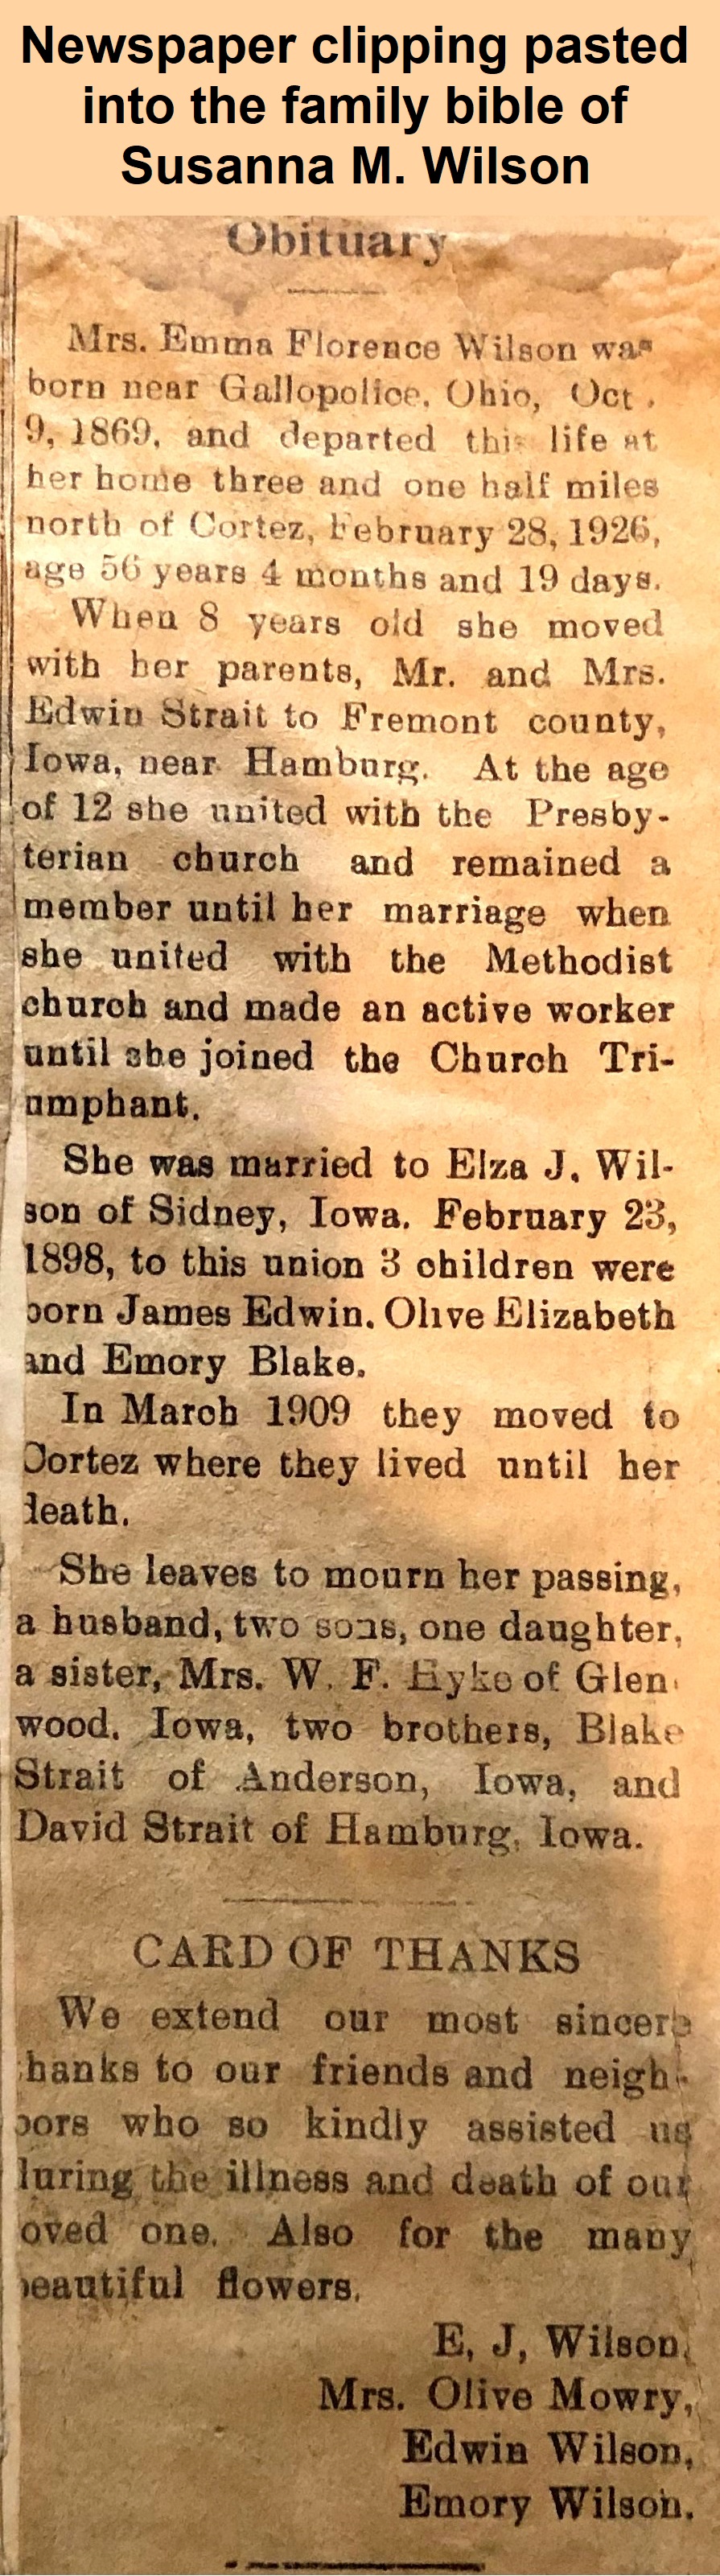 Image of obituary for Emma
                Florence Wilson found pasted into the family bible of Susanna M.
                Wilson